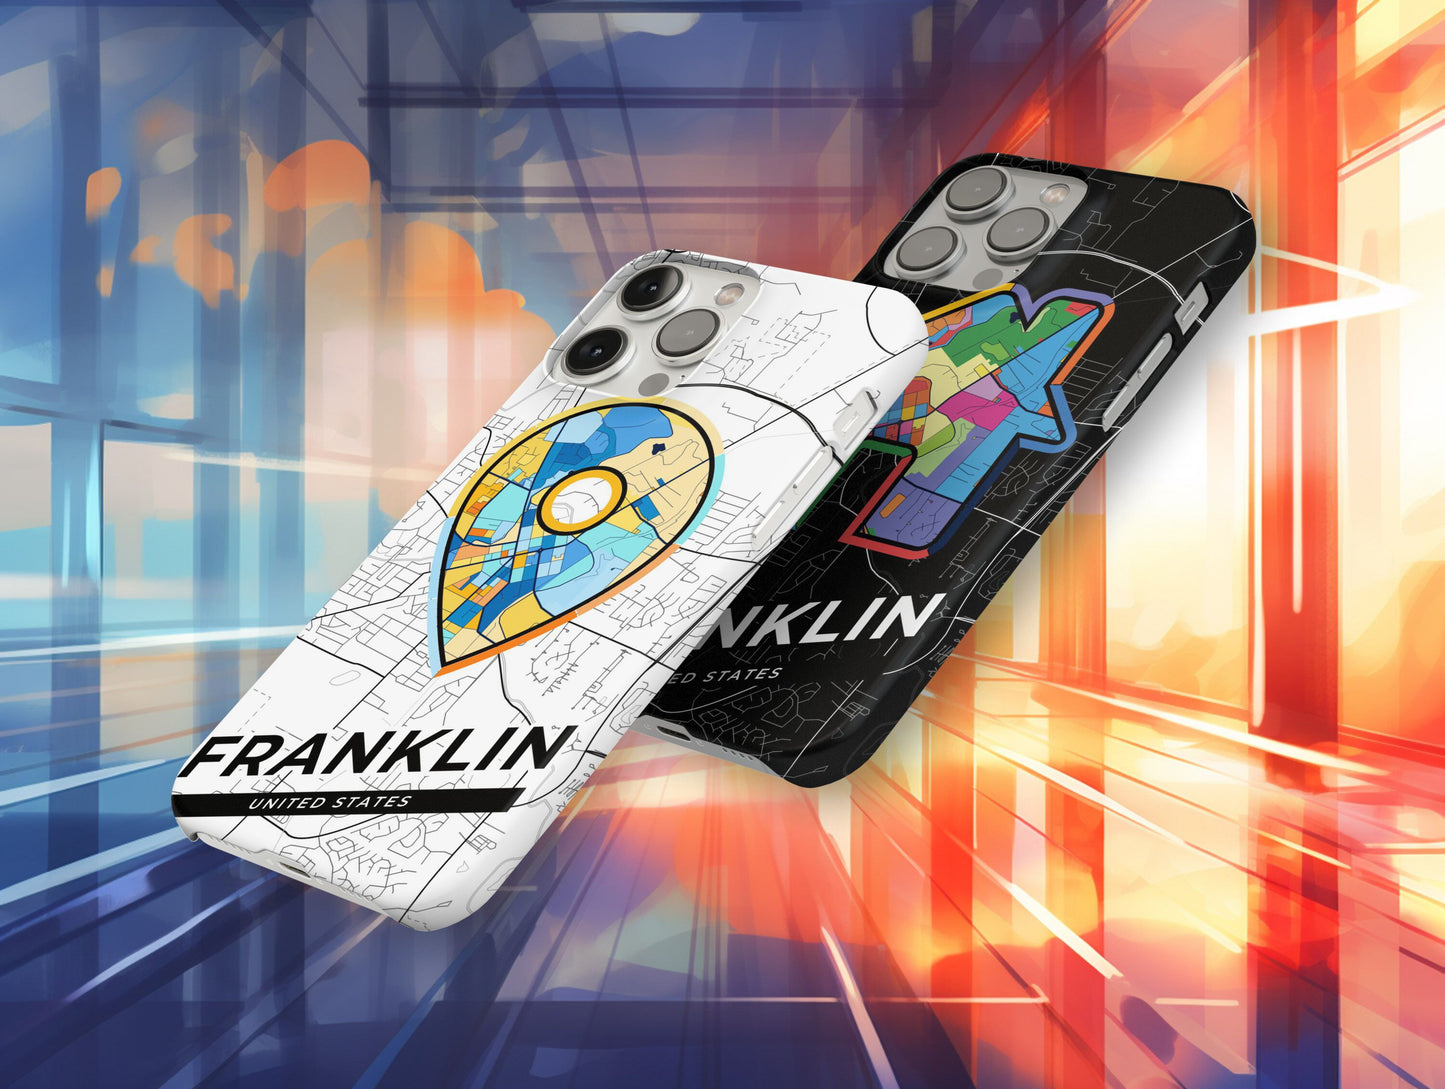 Franklin Tennessee slim phone case with colorful icon. Birthday, wedding or housewarming gift. Couple match cases.